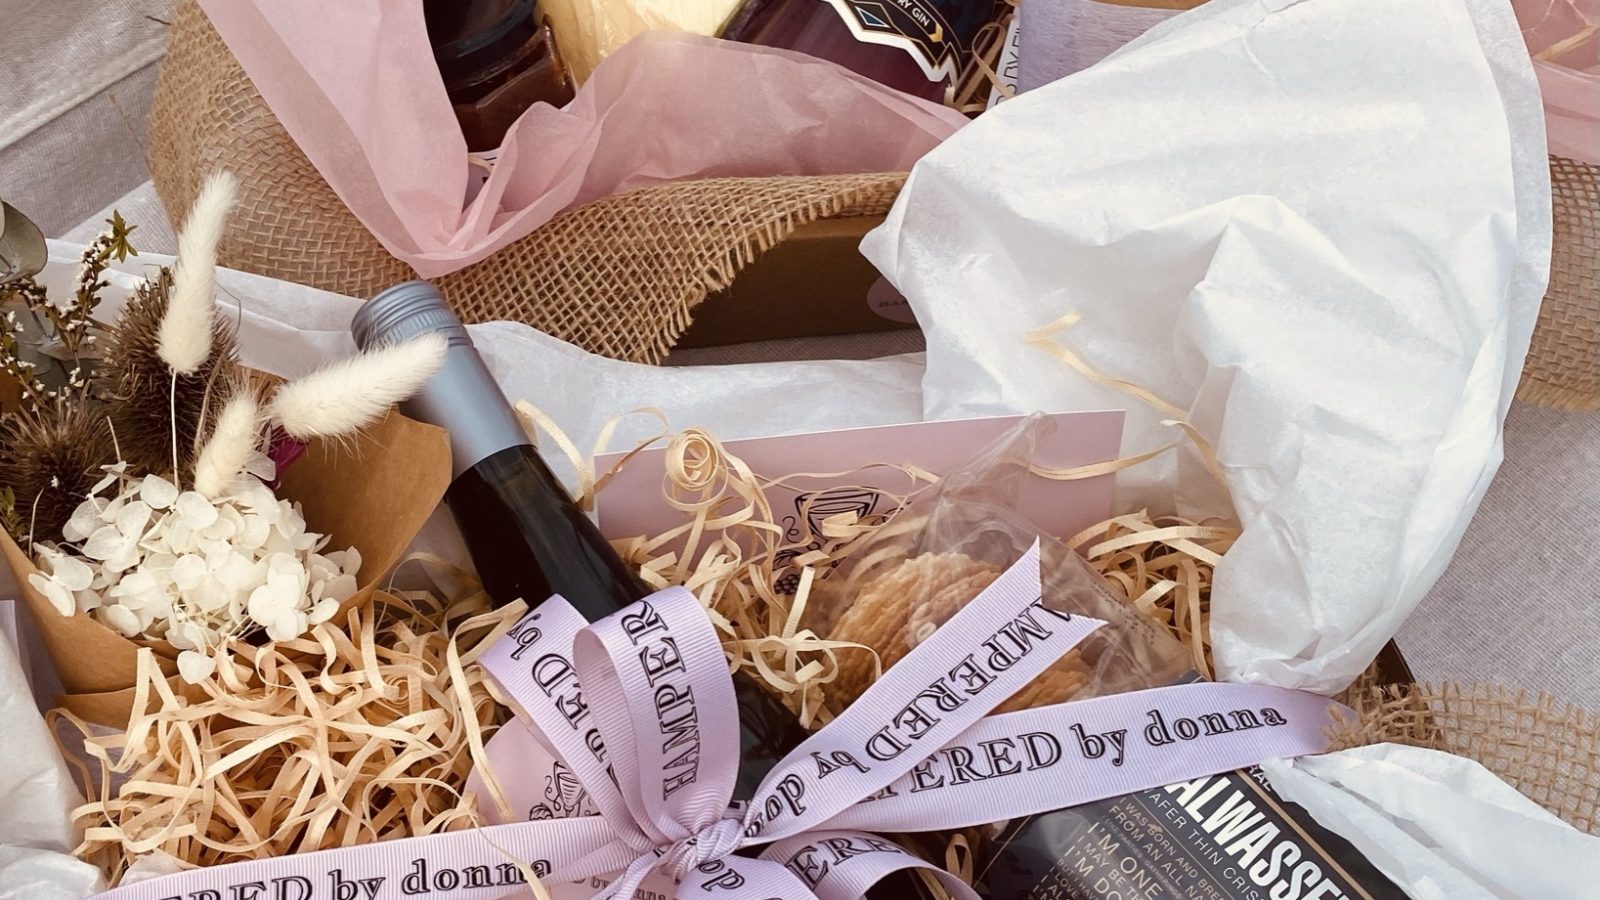 Deliciously stylish gift hampers from Hampered By Donna.